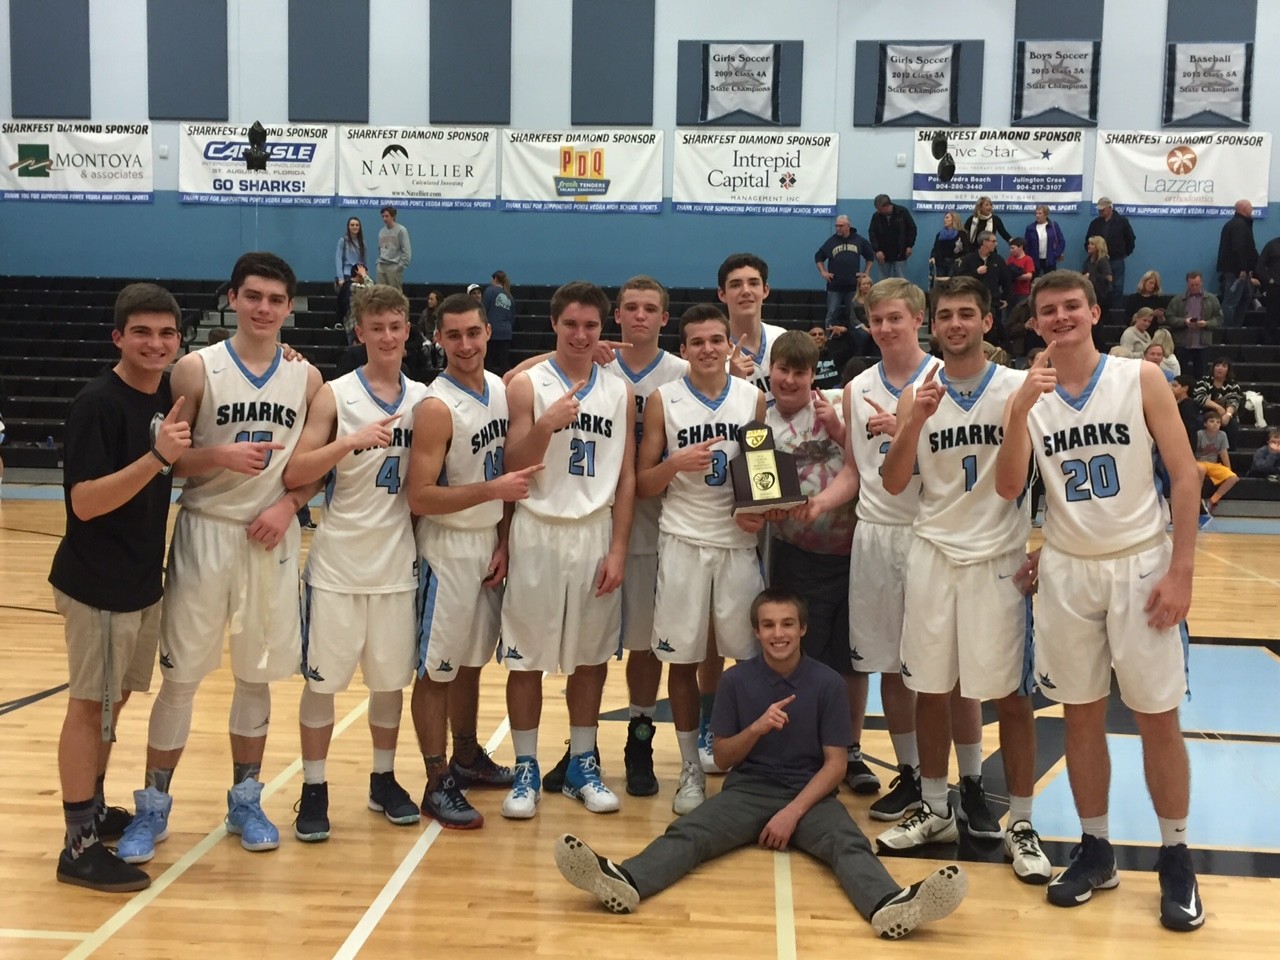 The Sharks varsity basketball team celebrates their third district championship in five years with their manager.